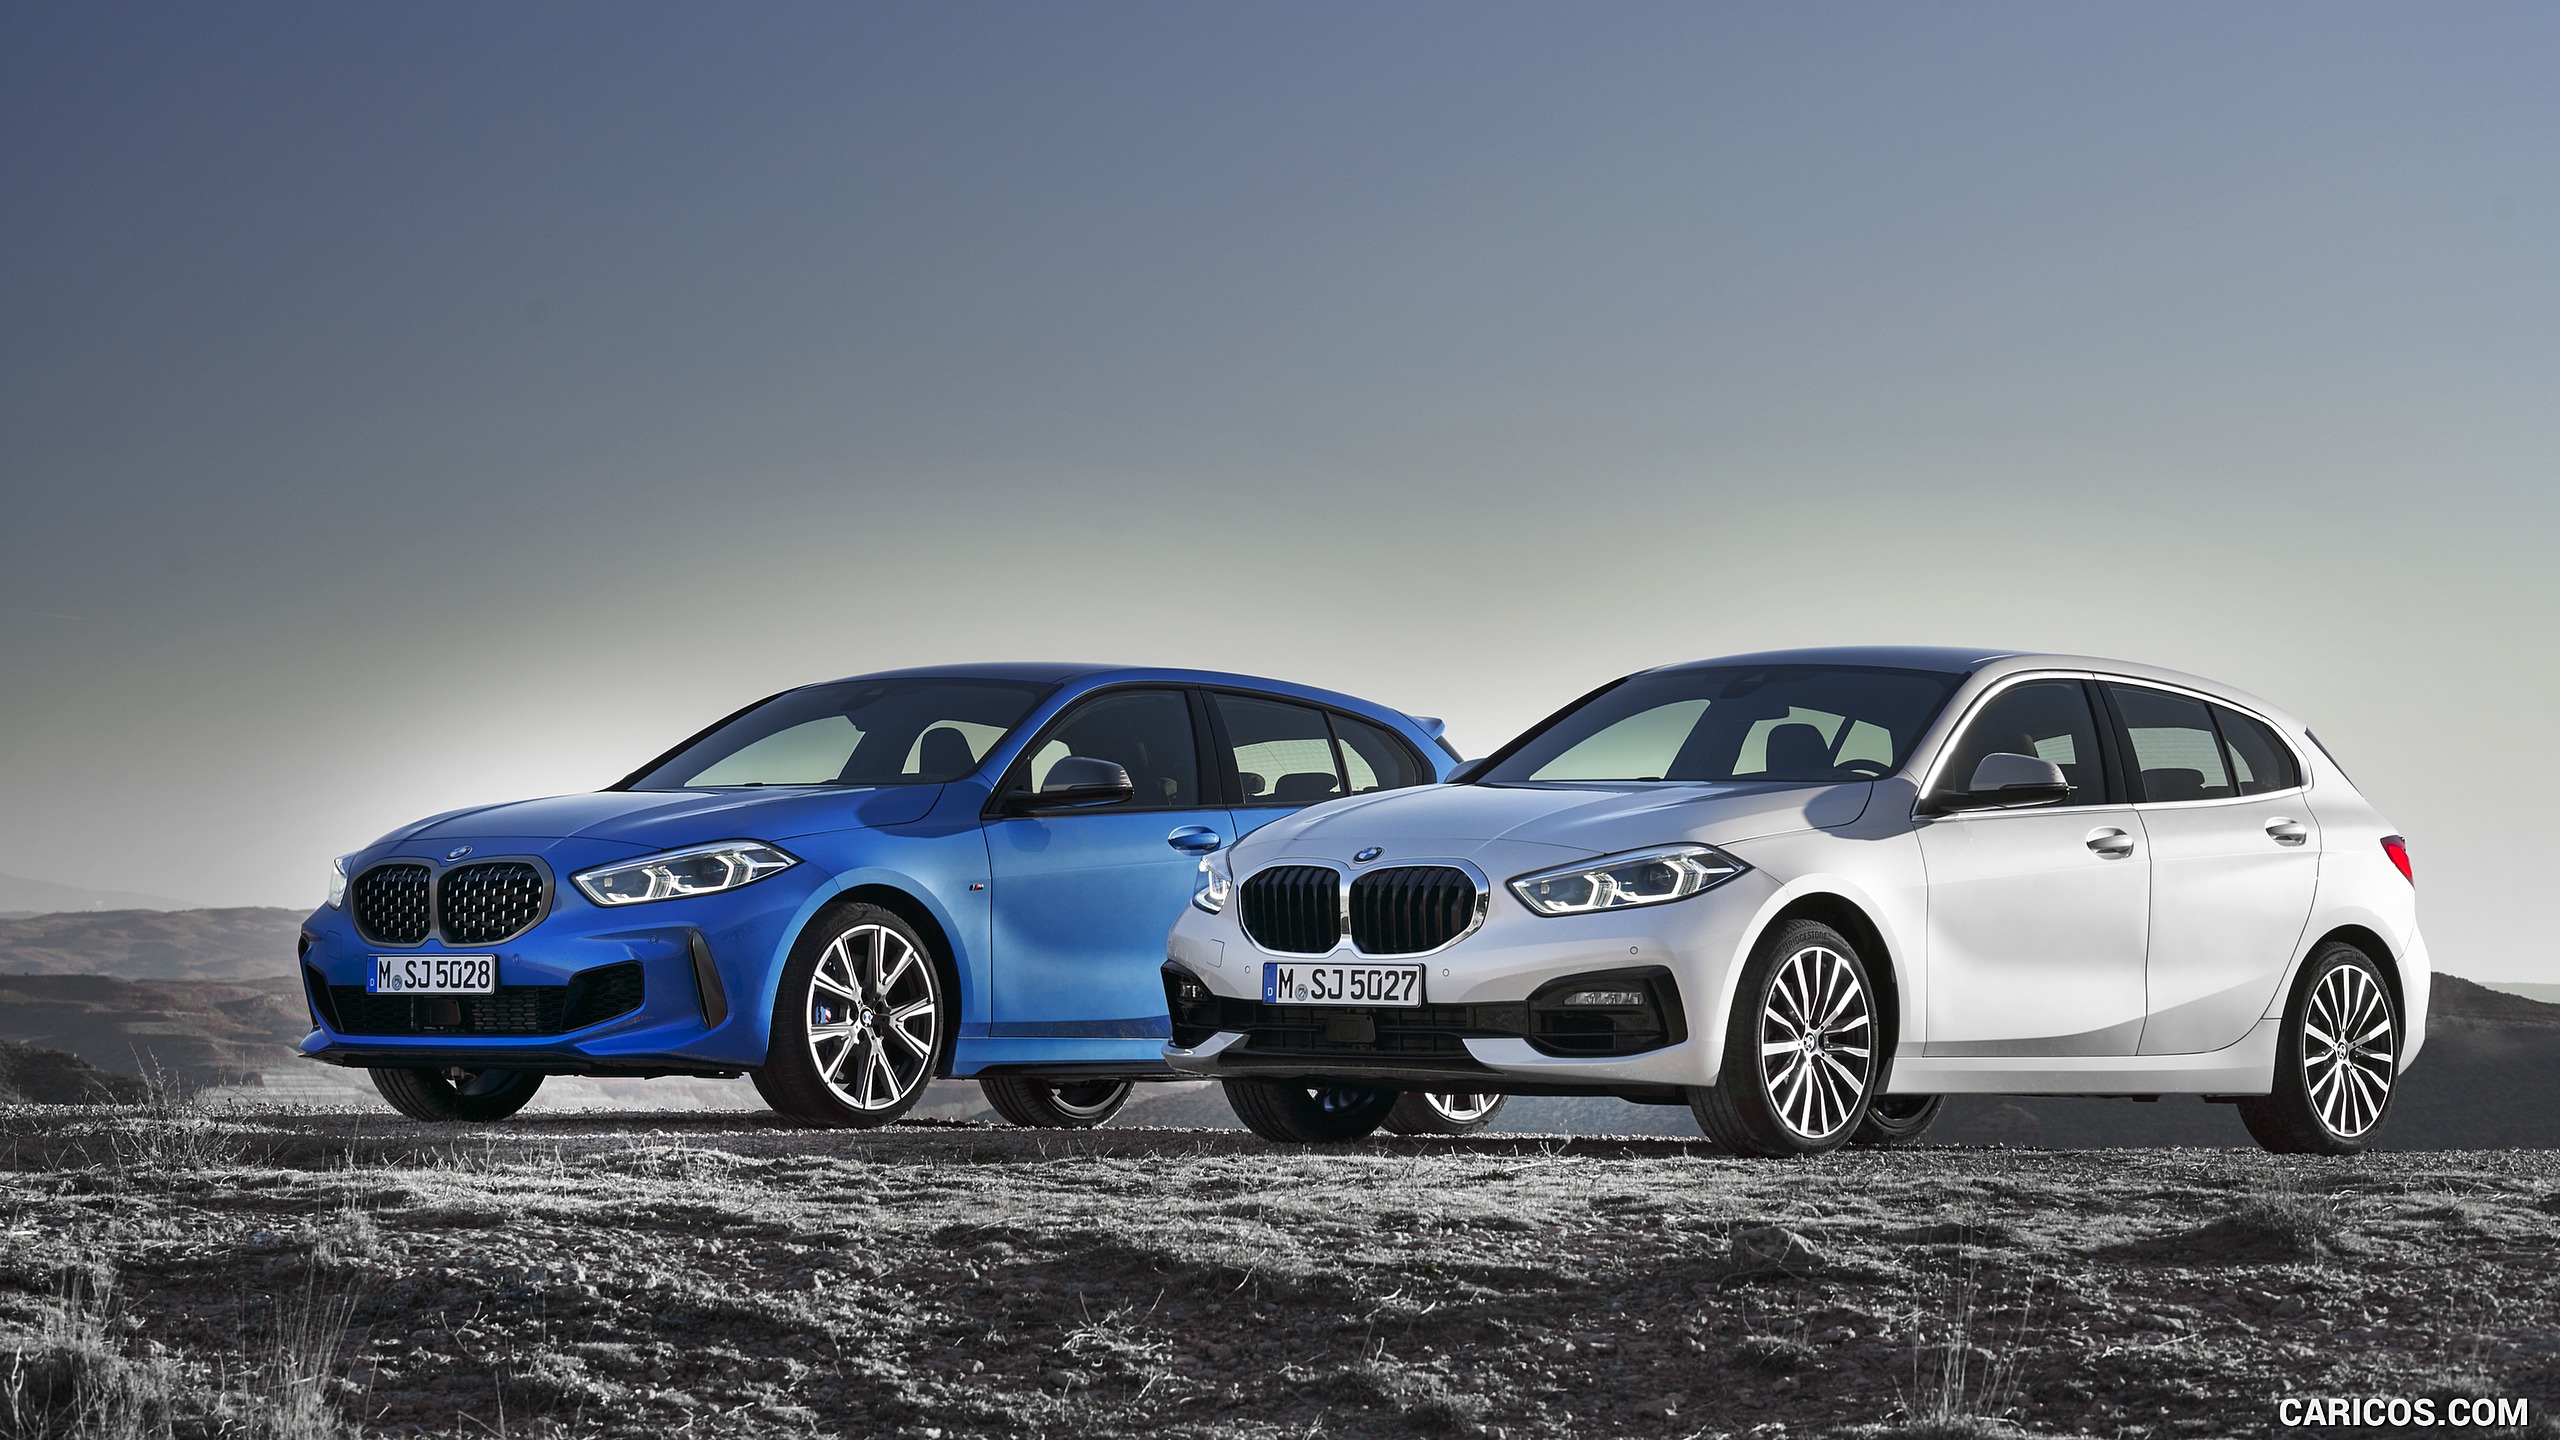 Free Download 2020 Bmw 1 Series 118i And M135i Hd Wallpaper 56 2560x1440 For Your Desktop Mobile Tablet Explore 50 Bmw 1 Series Wallpapers Bmw 1 Series Wallpapers Bmw 7 Series Wallpapers Bmw 5 Series Wallpaper